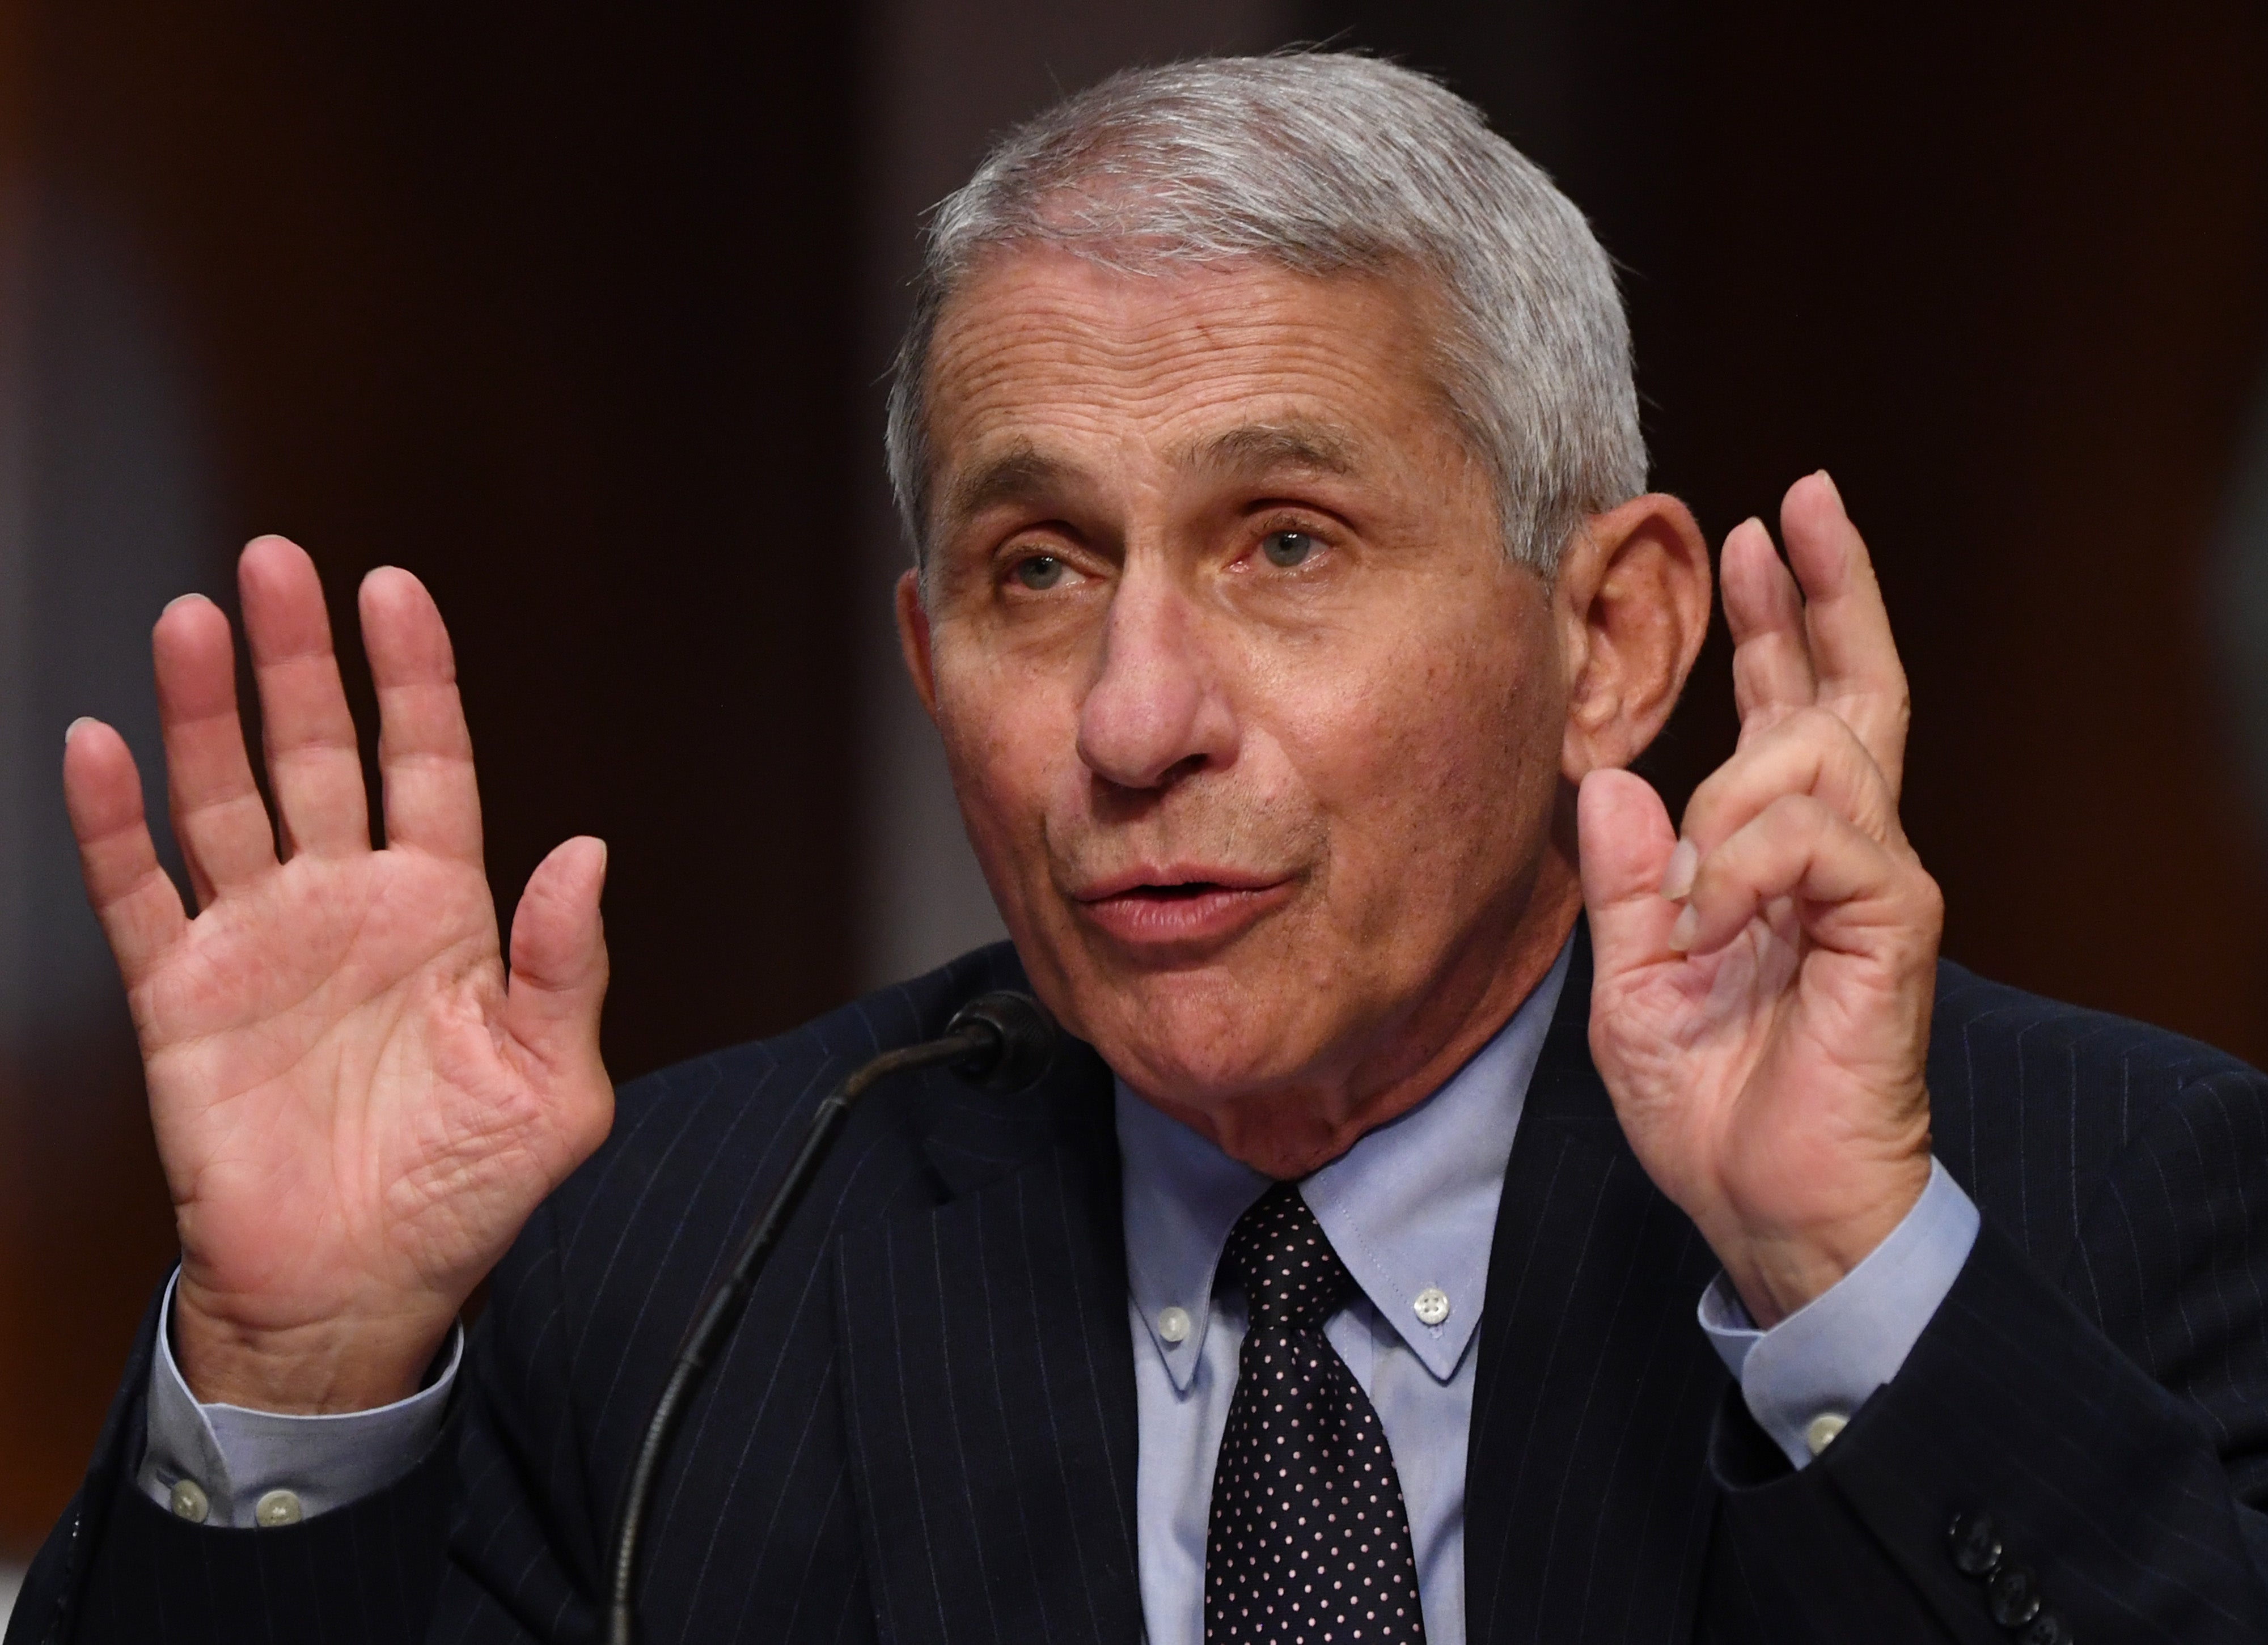 Dr. Anthony Fauci, director of the National Institute for Allergy and Infectious Diseases, testifies before the Senate Health, Education, Labor and Pensions (HELP) Committee hearing on Capitol Hill in Washington DC on 30 June, 2020 in Washington, DC.